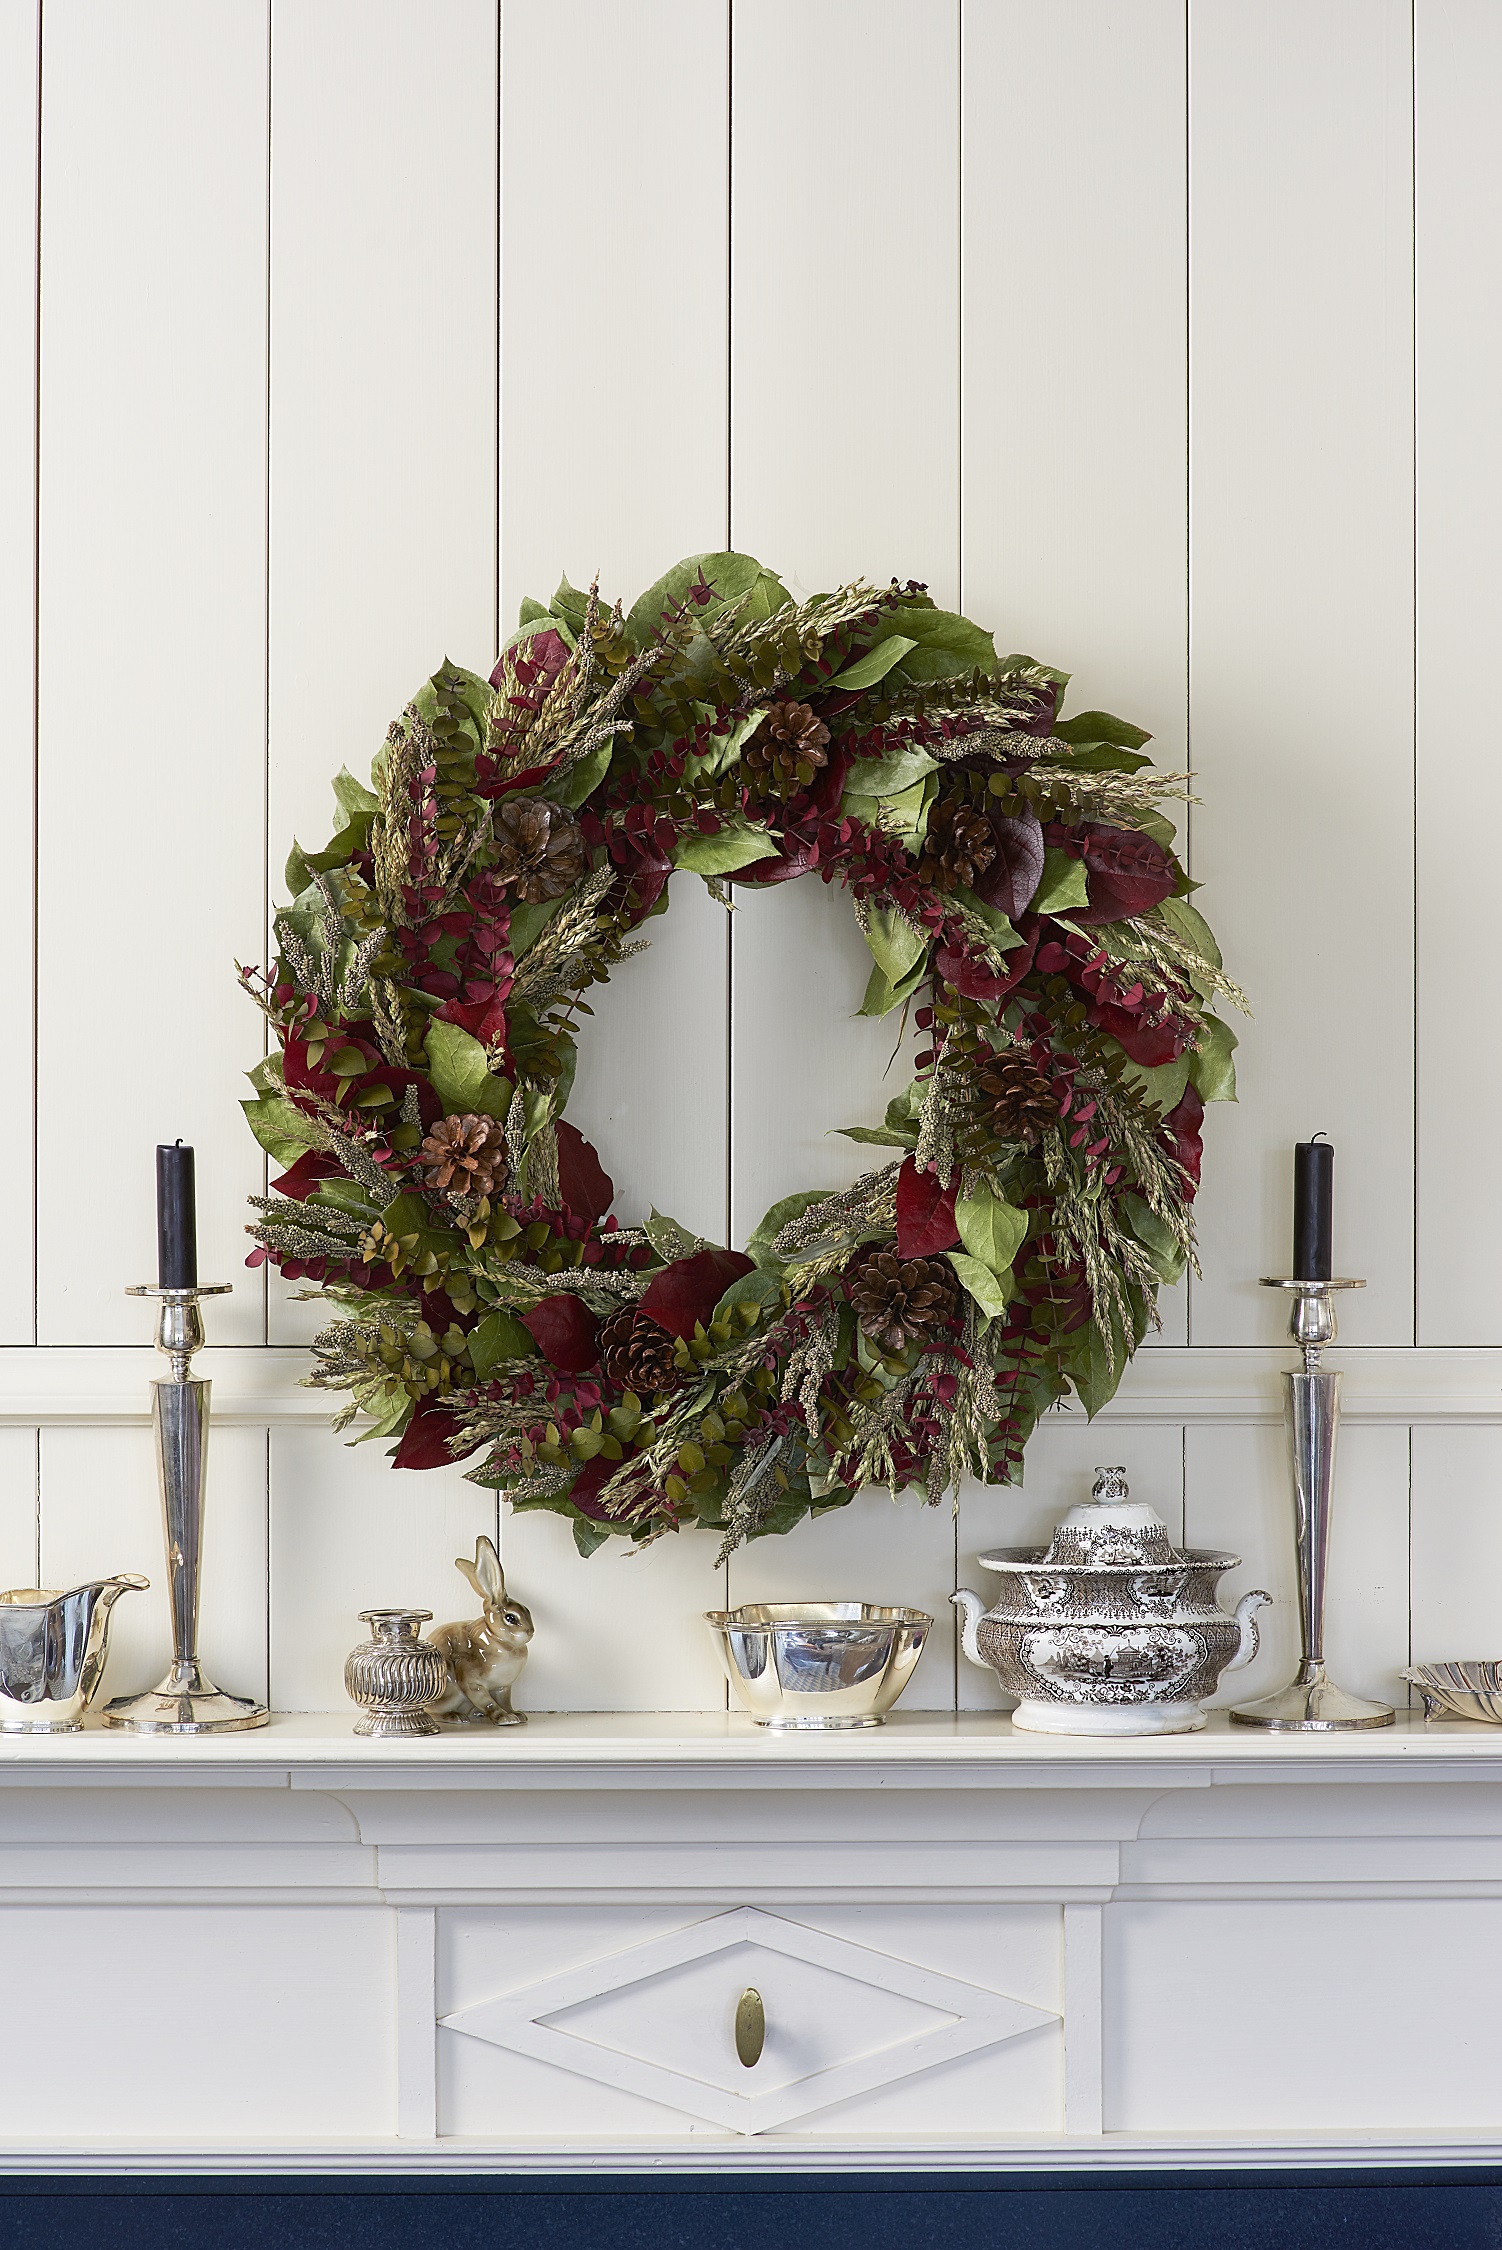 Give instant elegance when you gift this richly colored and textured wreath.